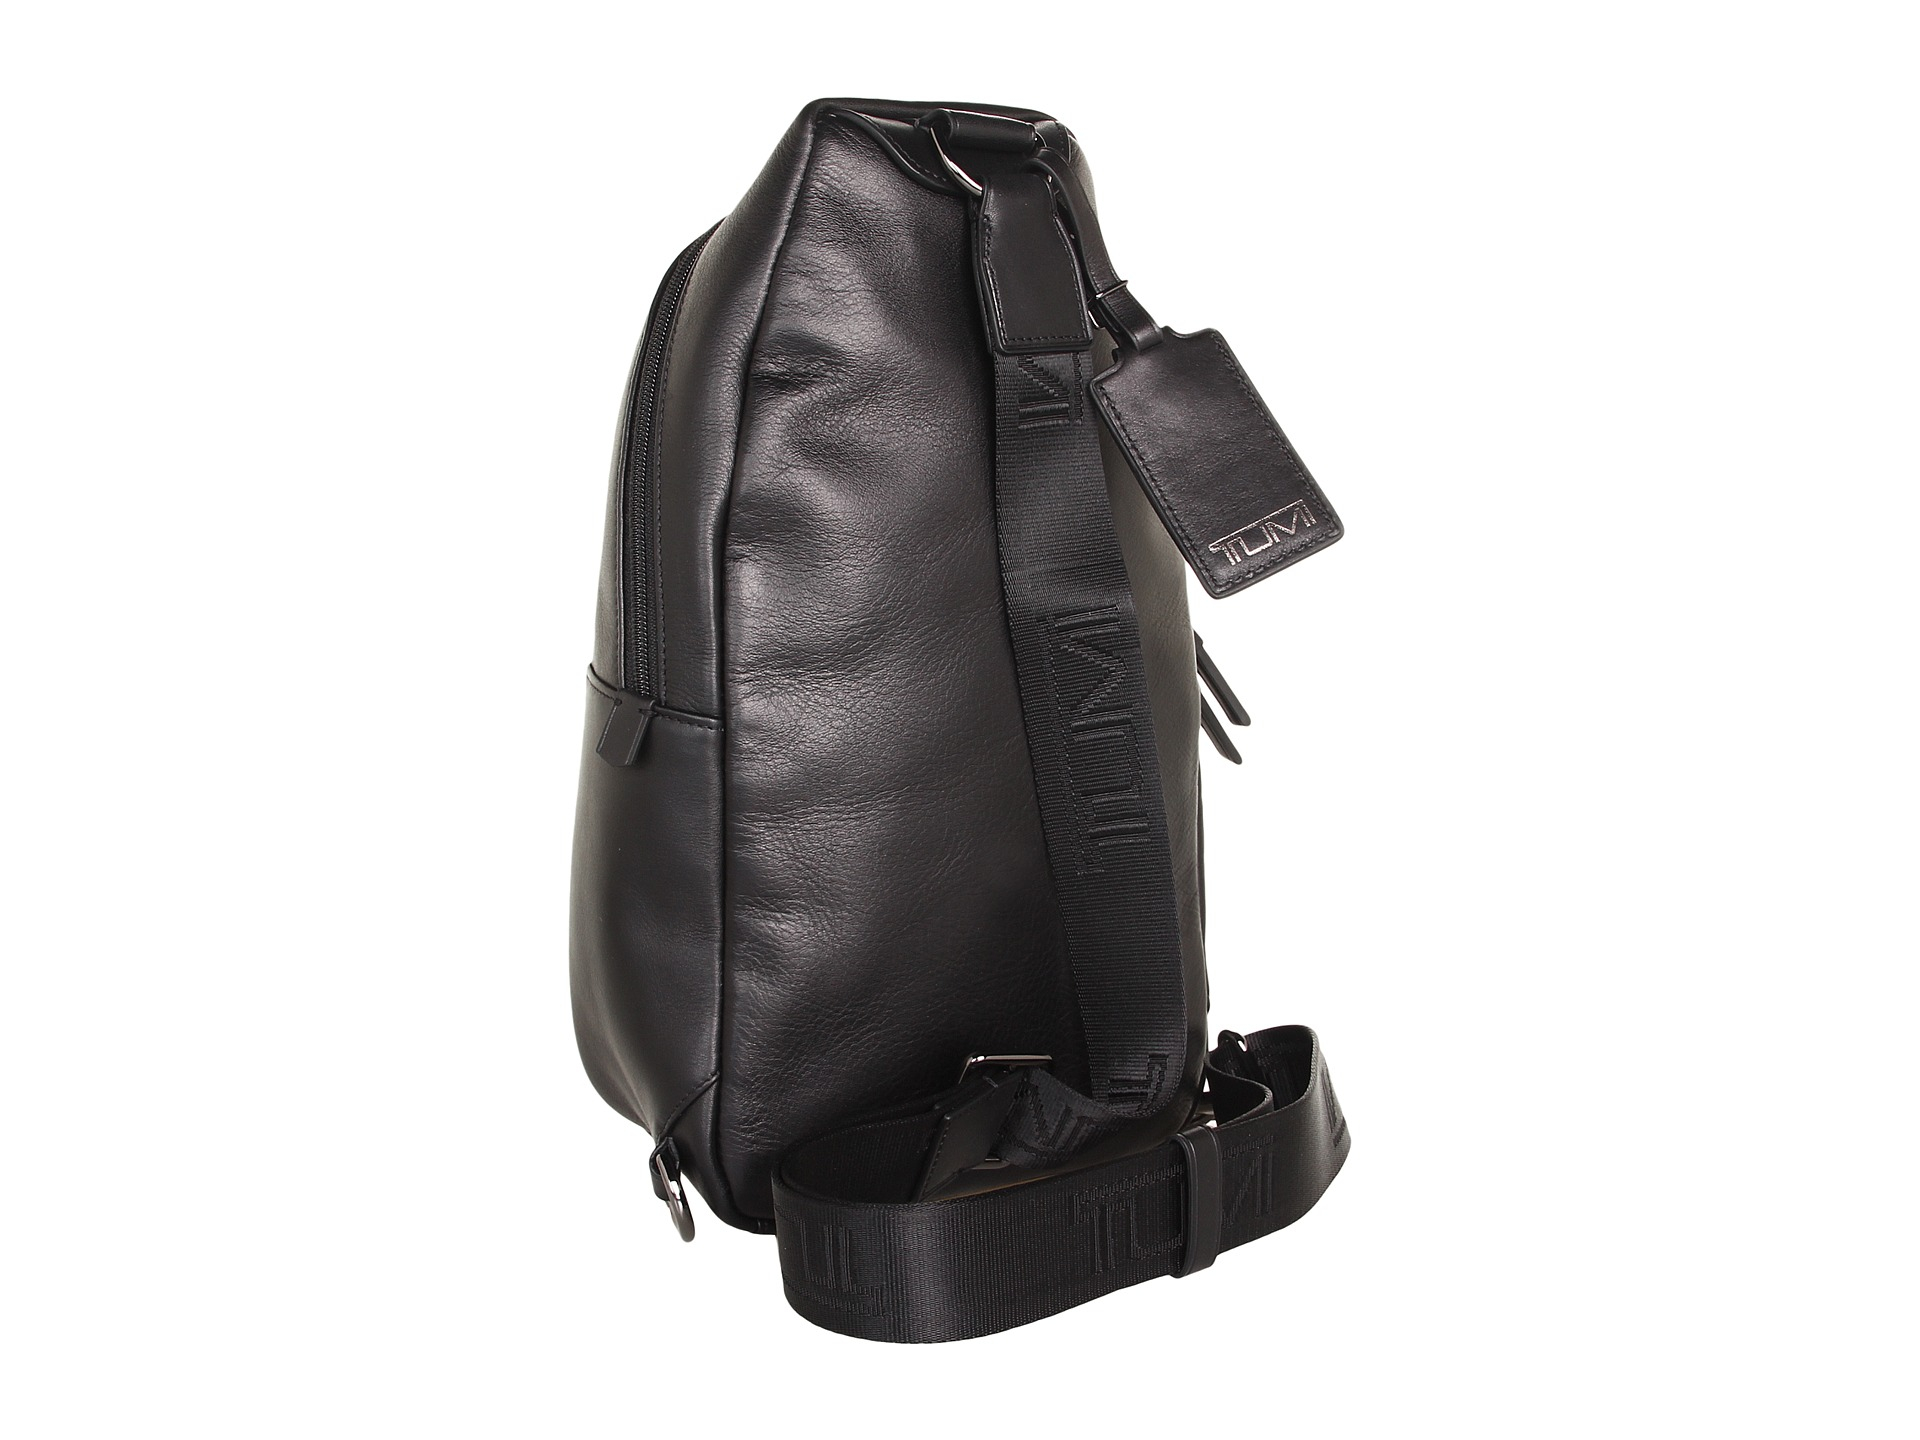 Free shipping > tumi sling bag leather > Up to 76% OFF >